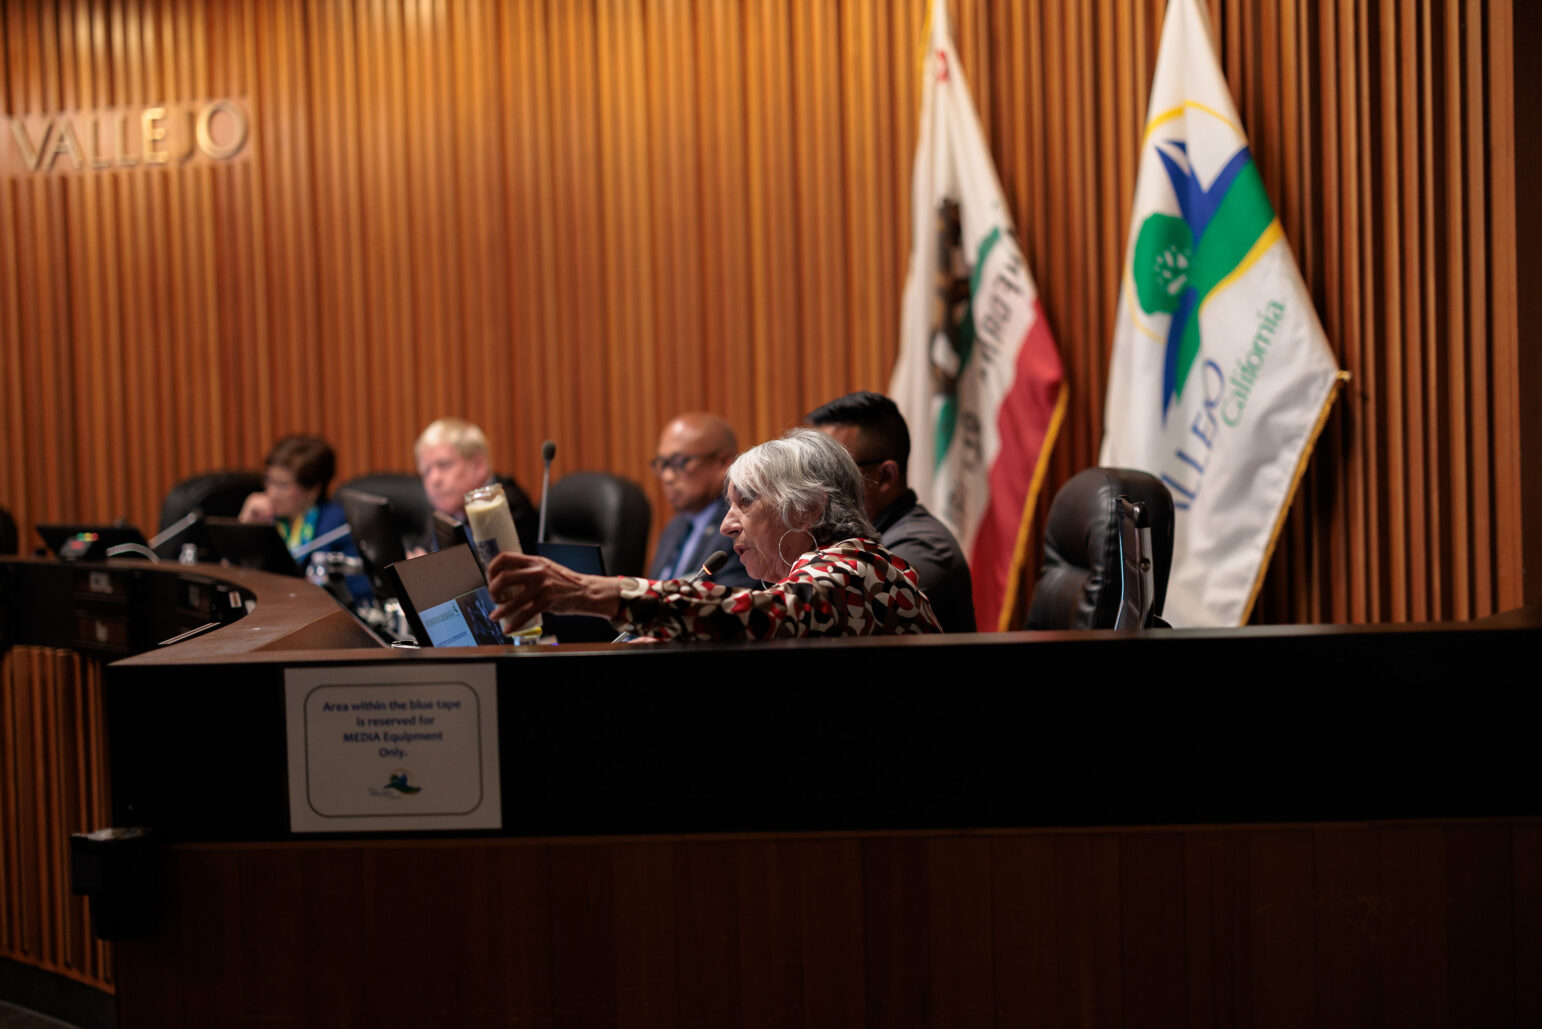 A Vallejo city councilwoman with white hair and wearing a brightly patterned top places a votive candle on the dais in front of her.